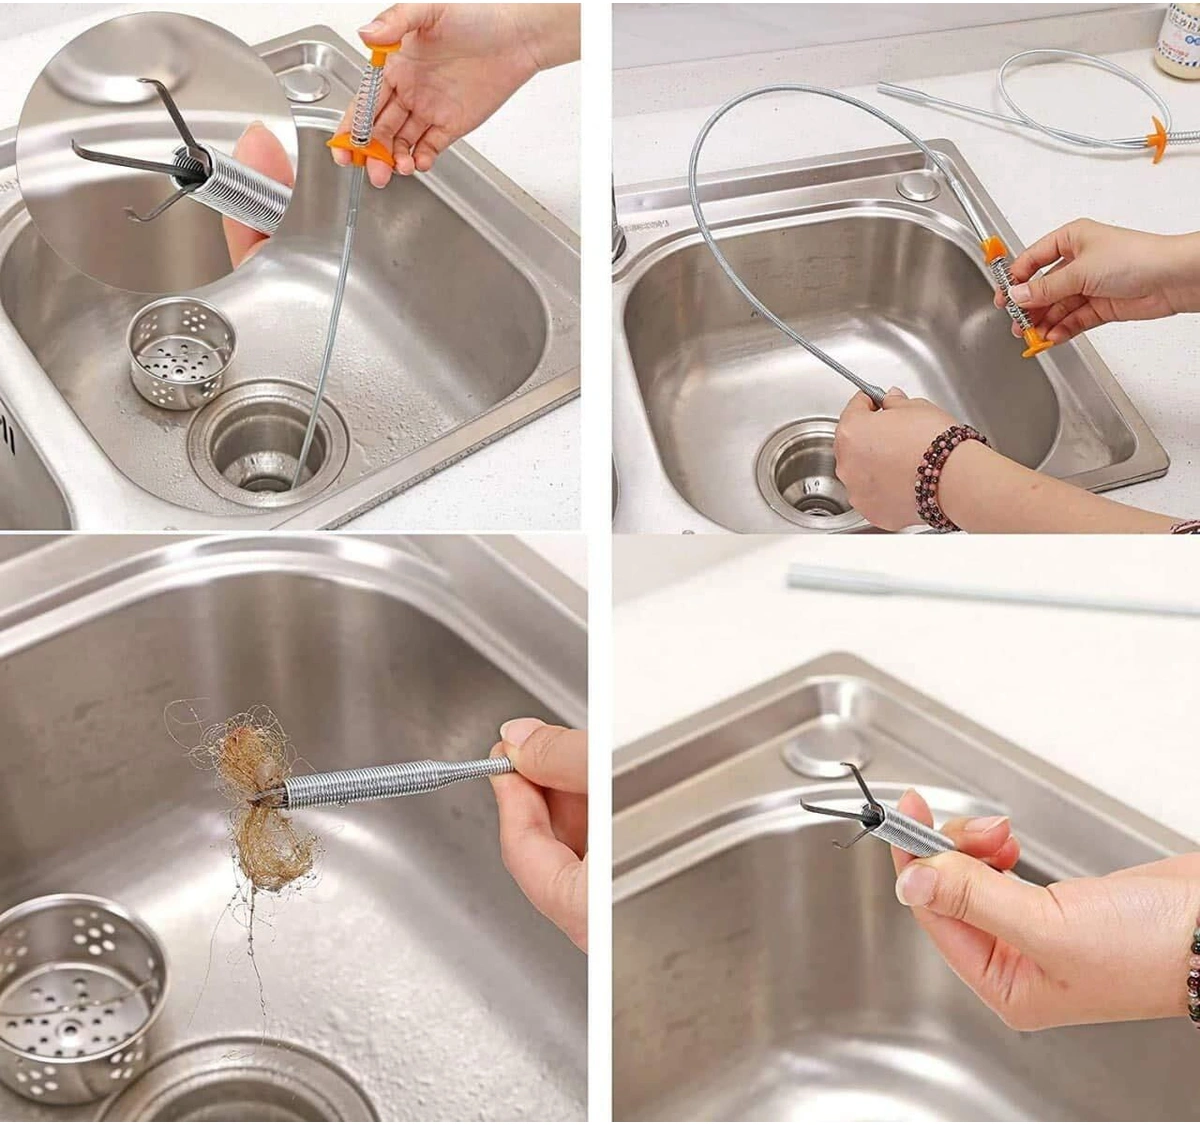 Sink Hair Cleaning Dredge Hook Tool Toilet Drain Cleaner Clogging Remover  Sewer Pipe Drain Cleaning Tools Kitchen Hair Remover